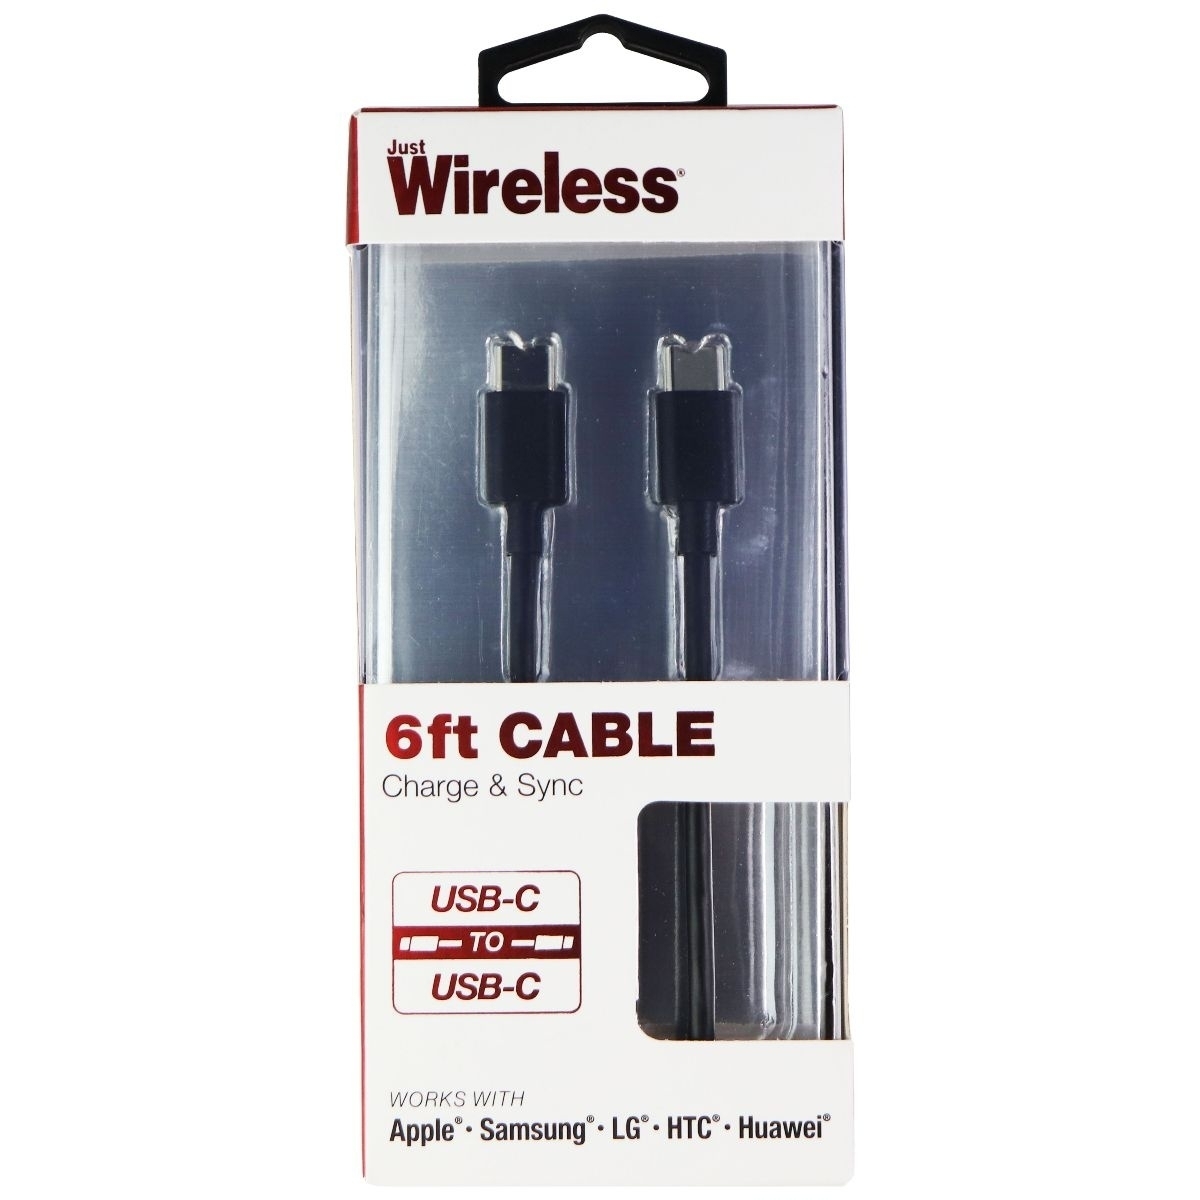 Just Wireless (6-Ft) Charge And Sync USB-C To USB-C Cable - Black